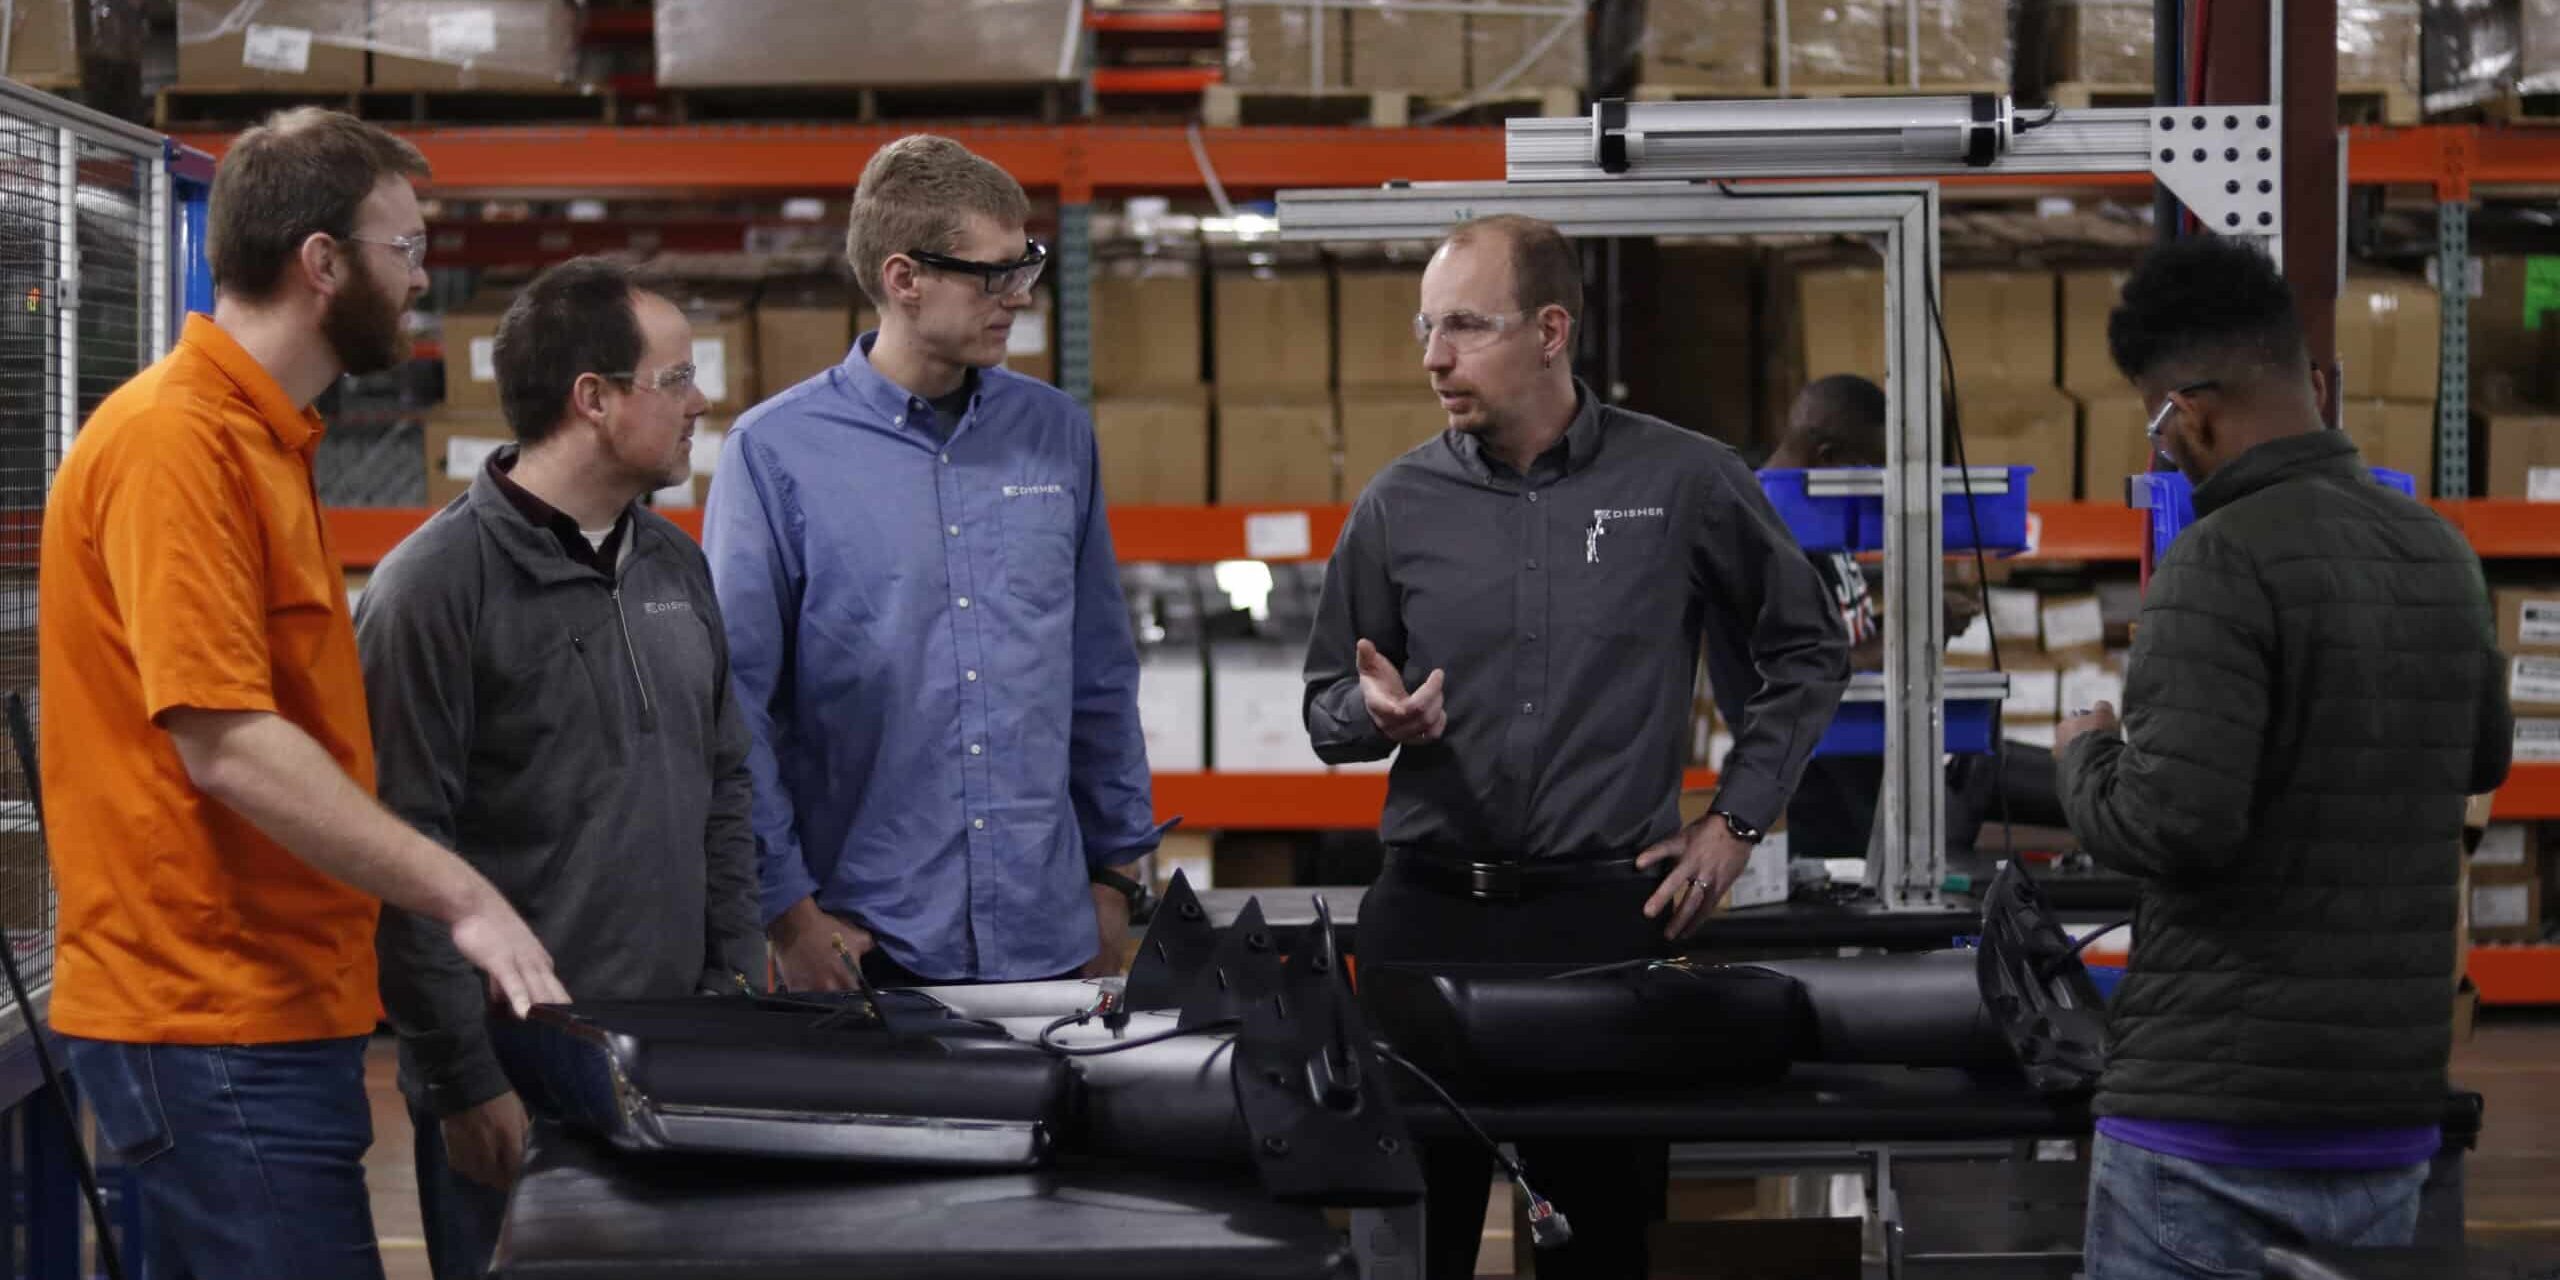 Four engineers stand in a manufacturing space discussing processes